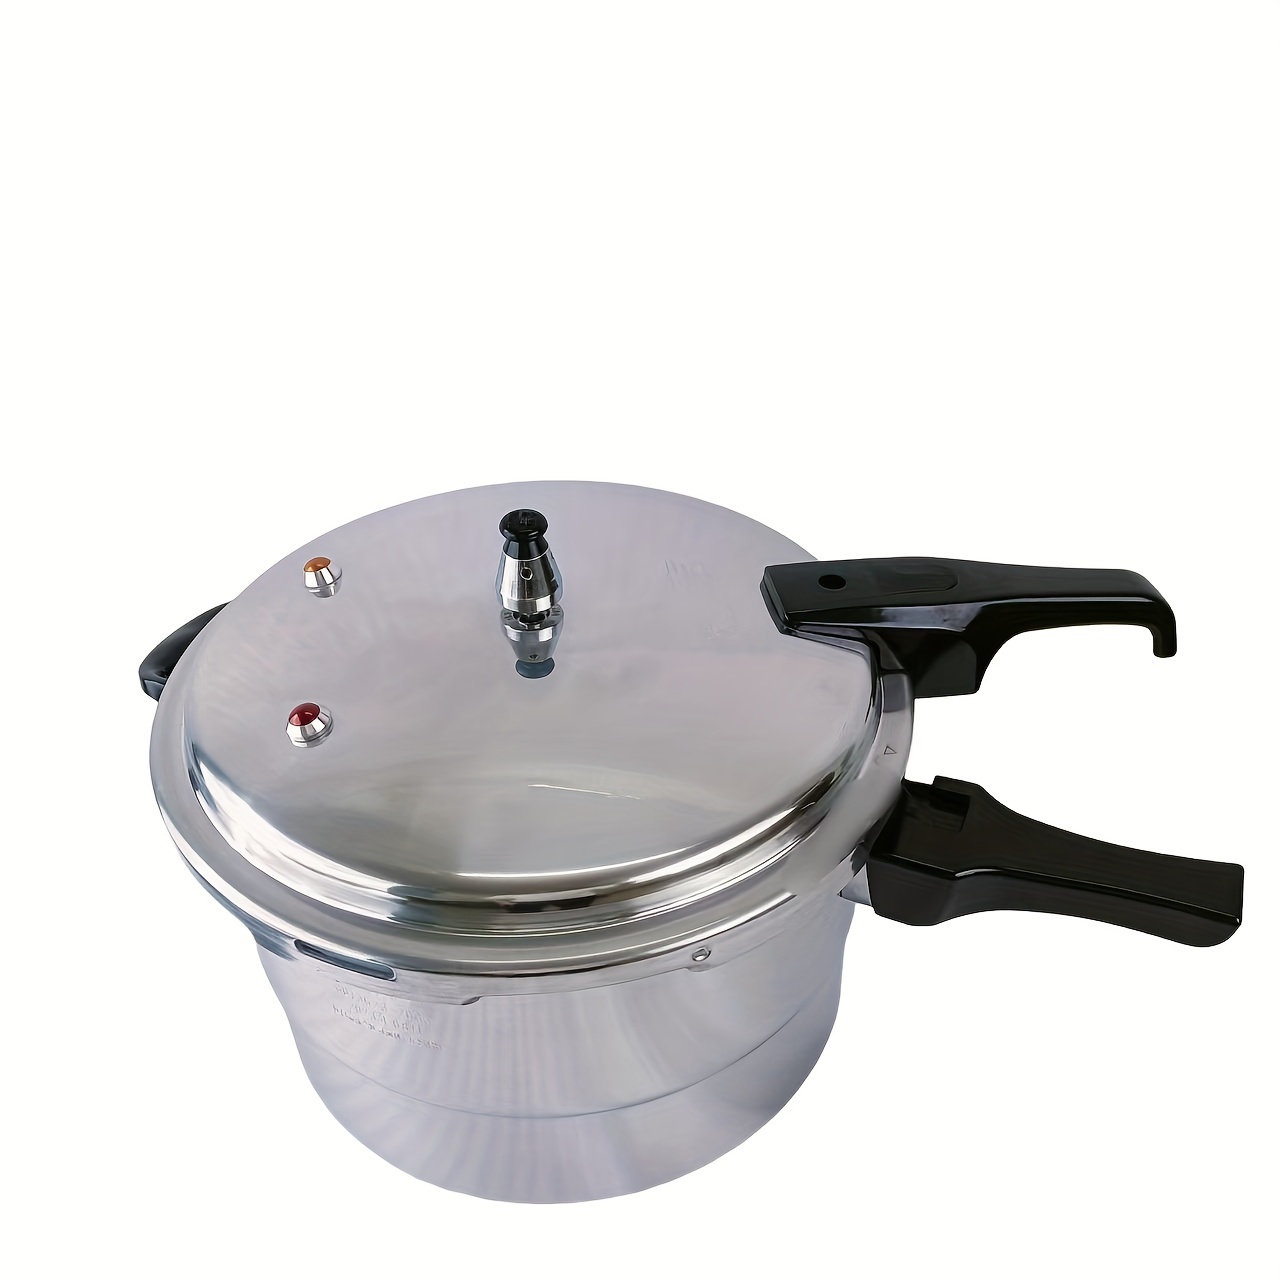 Commercial pressure cooker Large explosion-proof alloy pressure cooker  Household gas fire safety explosion-proof cookware Food grade aluminum  Suitable for hotel…